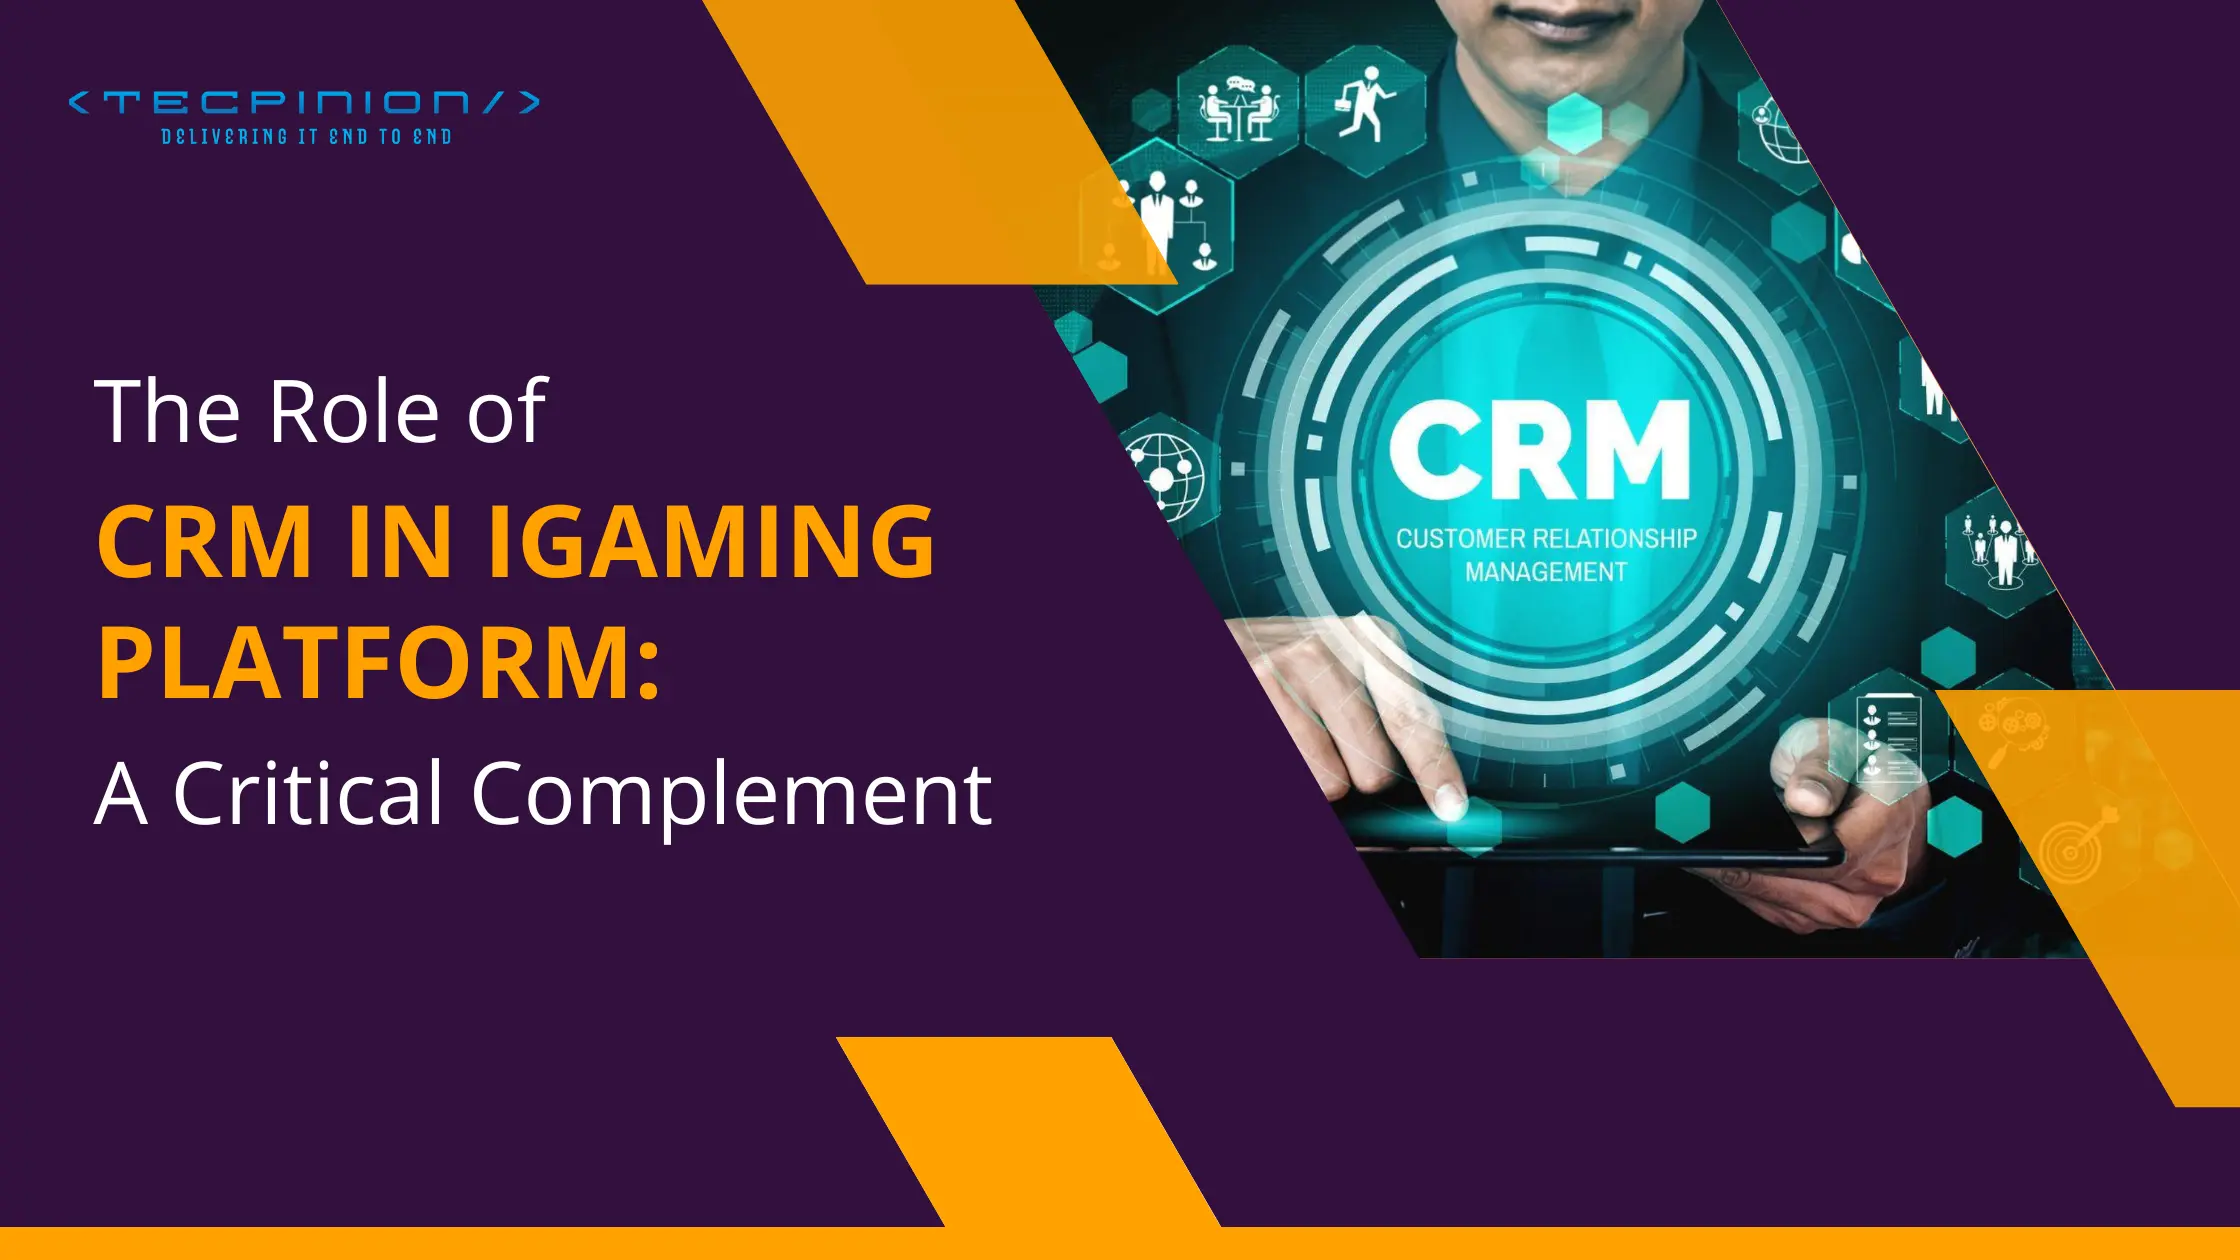 The Role of CRM in iGaming Platform: A Critical Complement